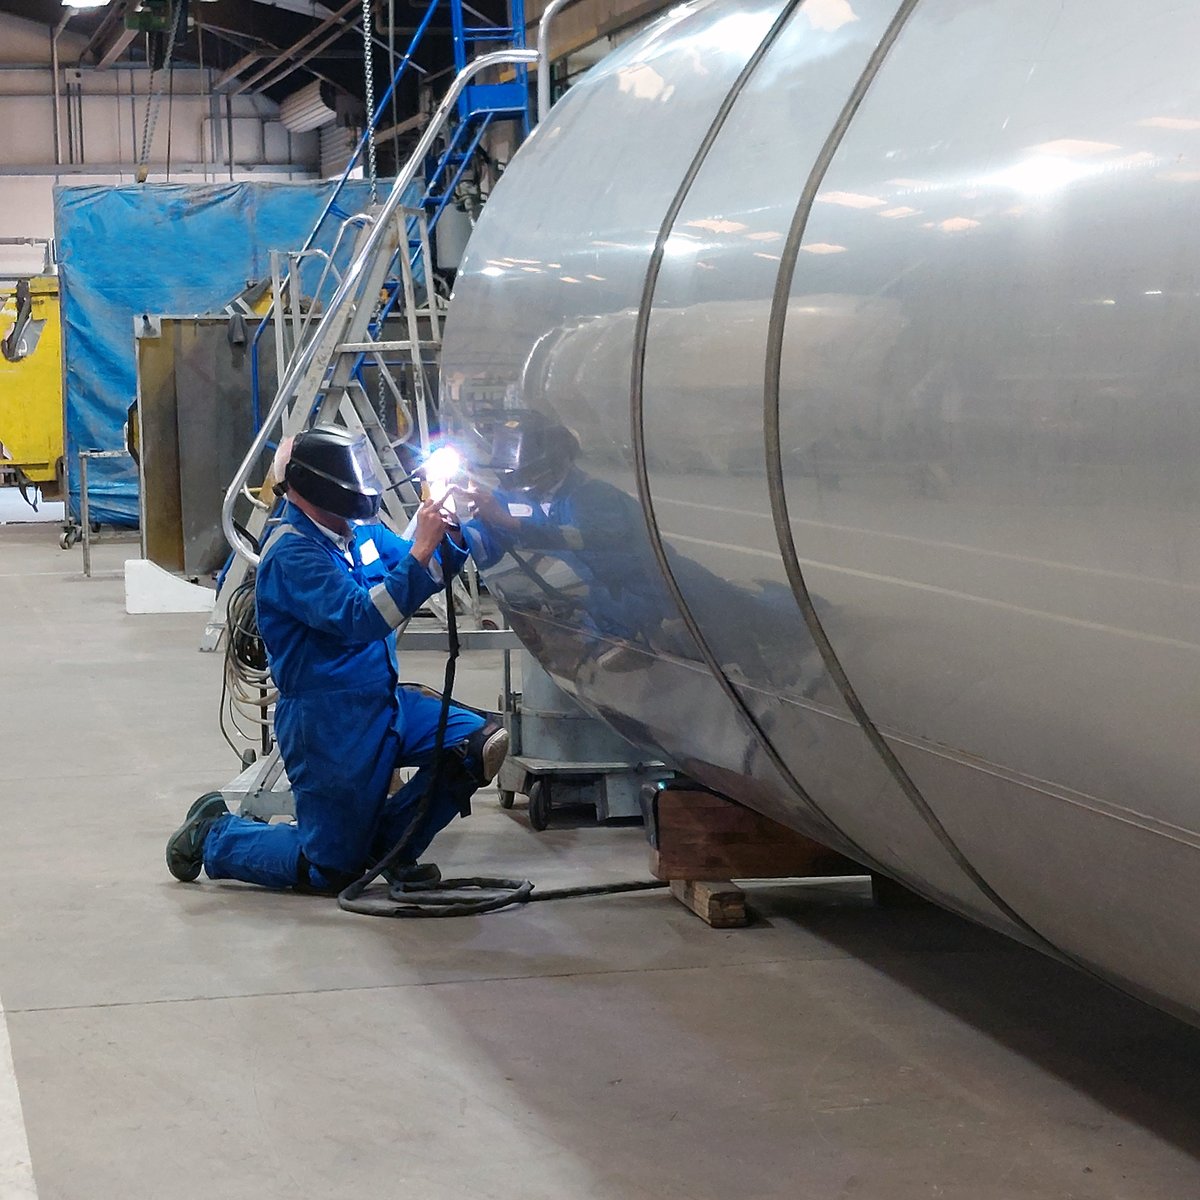 Some quality welding is underway on one of our vessels on the production line! 

All DX Tanks are available in capacities ranging from 1200 to 34,000 litres to suit the individual requirements of any farm.

Get in contact for more information!

#manufacturemonday #weldlife #ukmfg